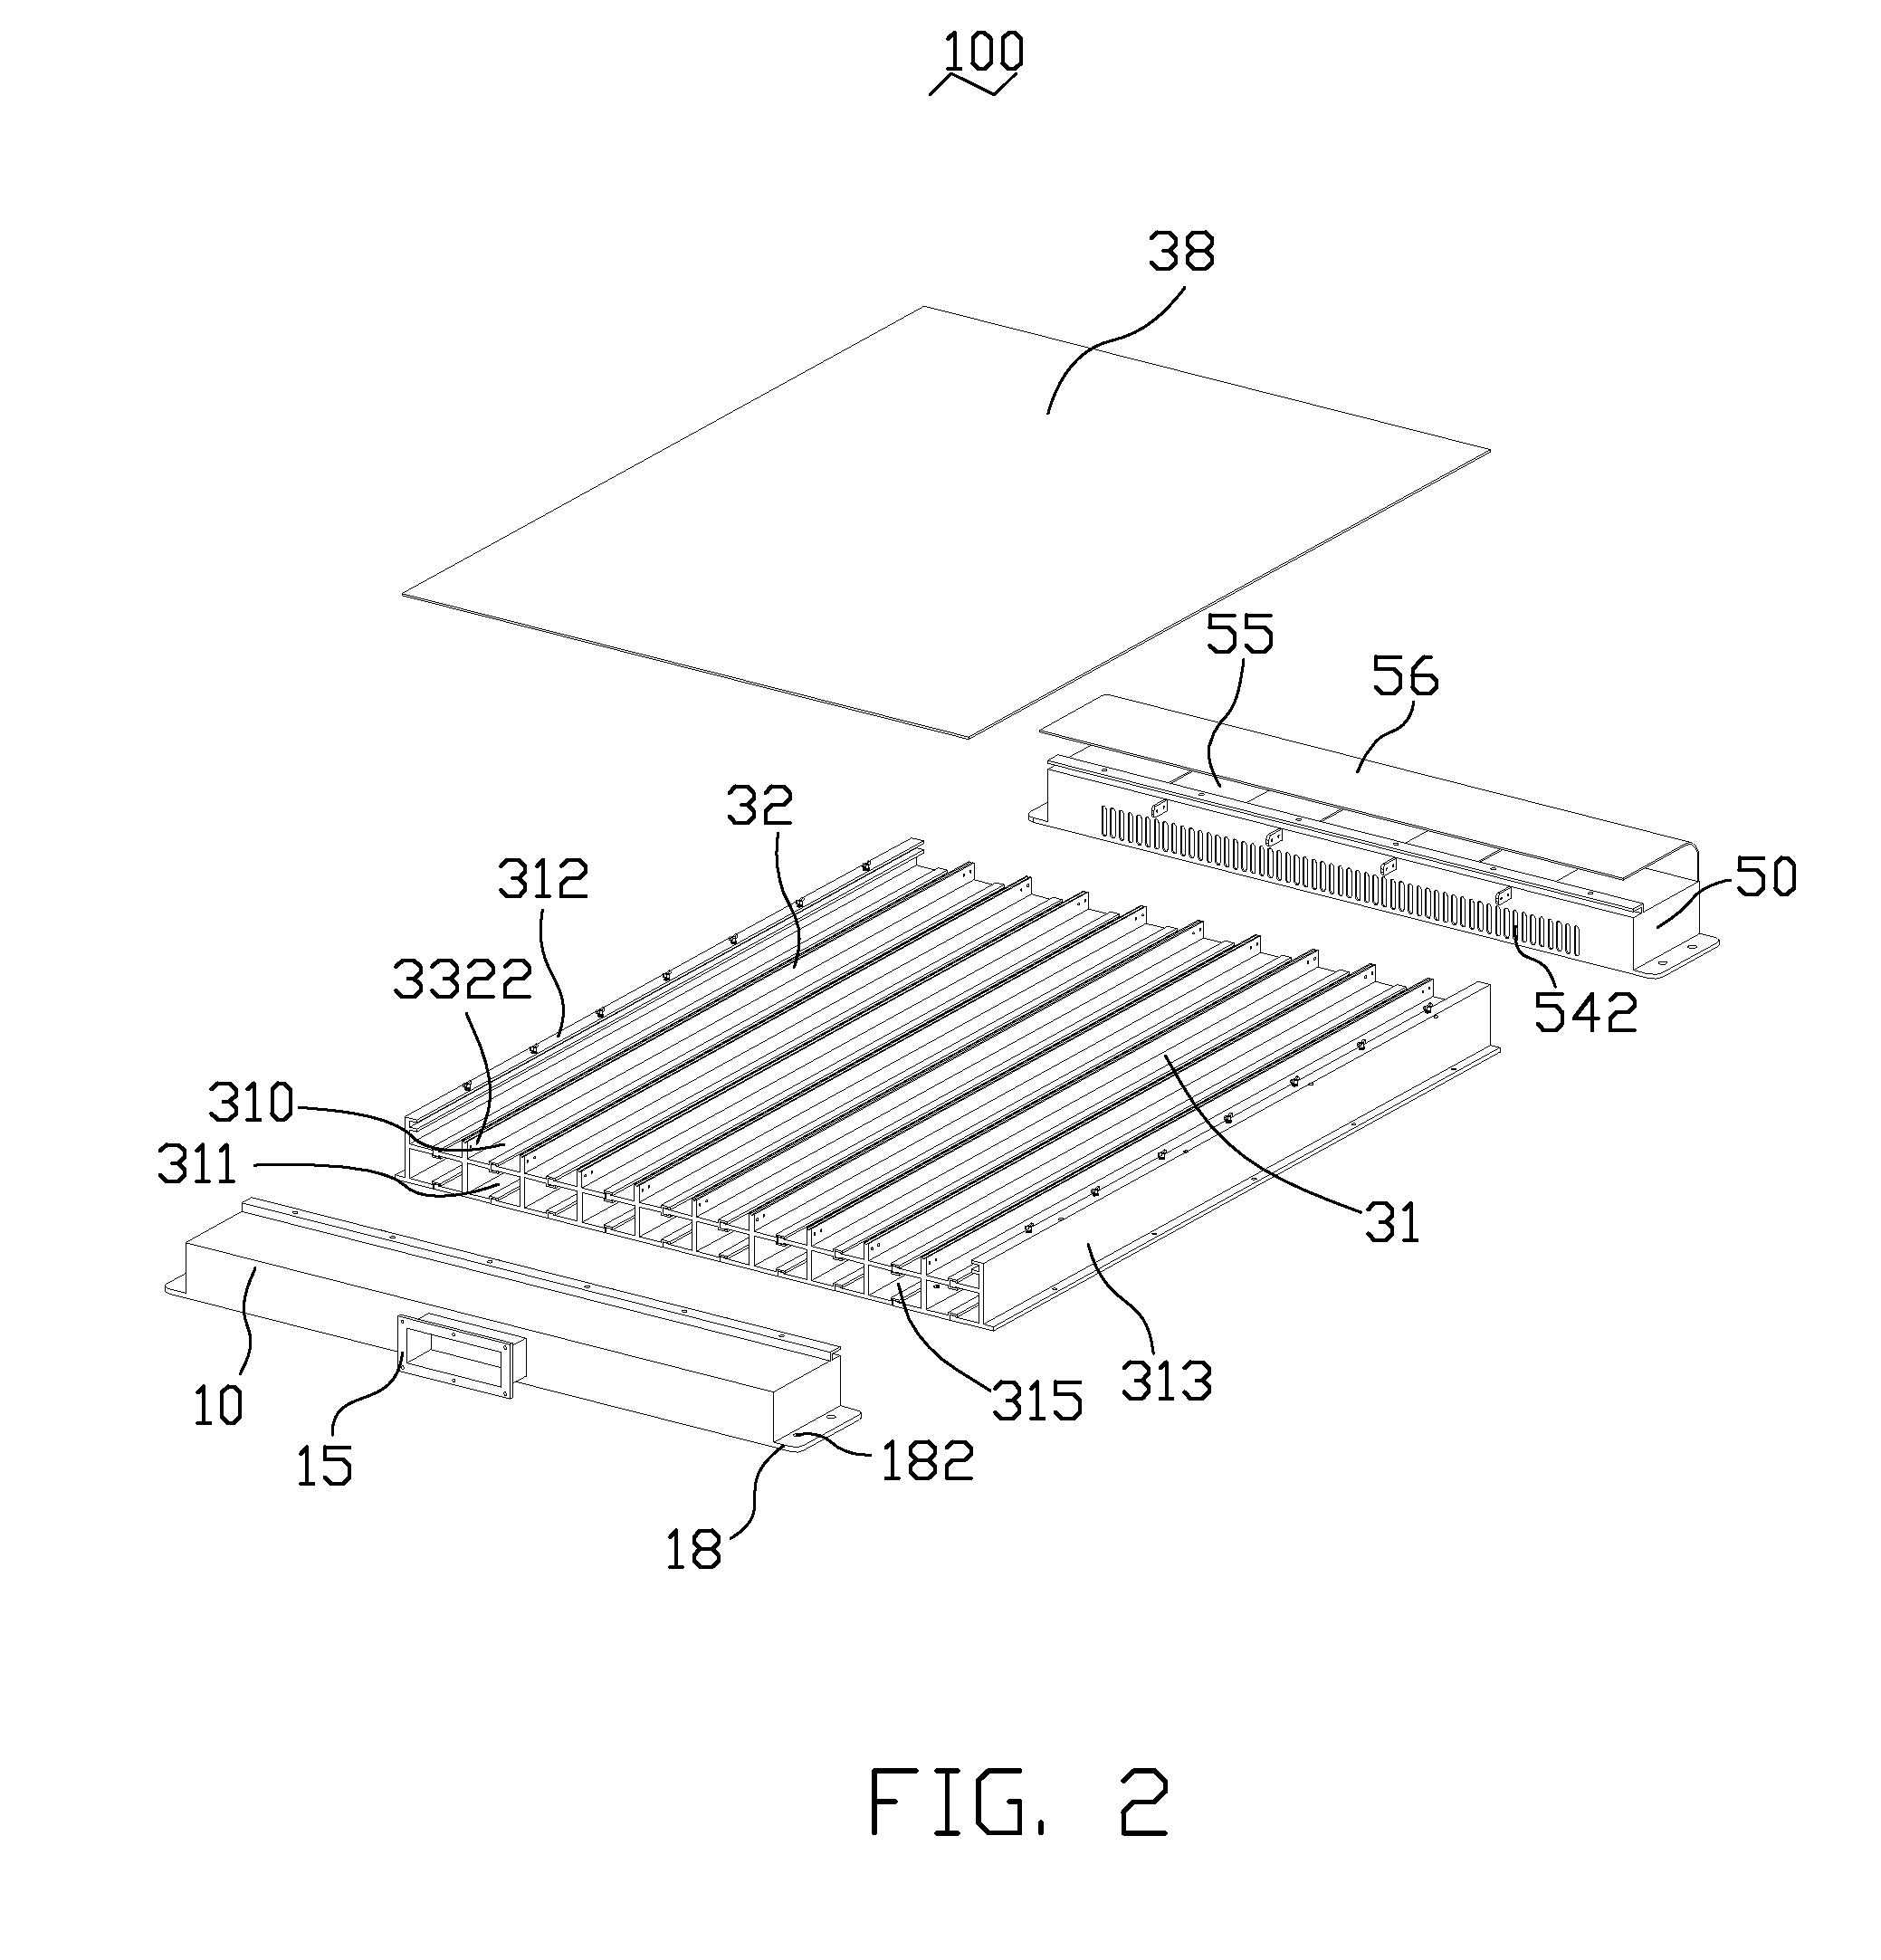 Solar air conditioning device